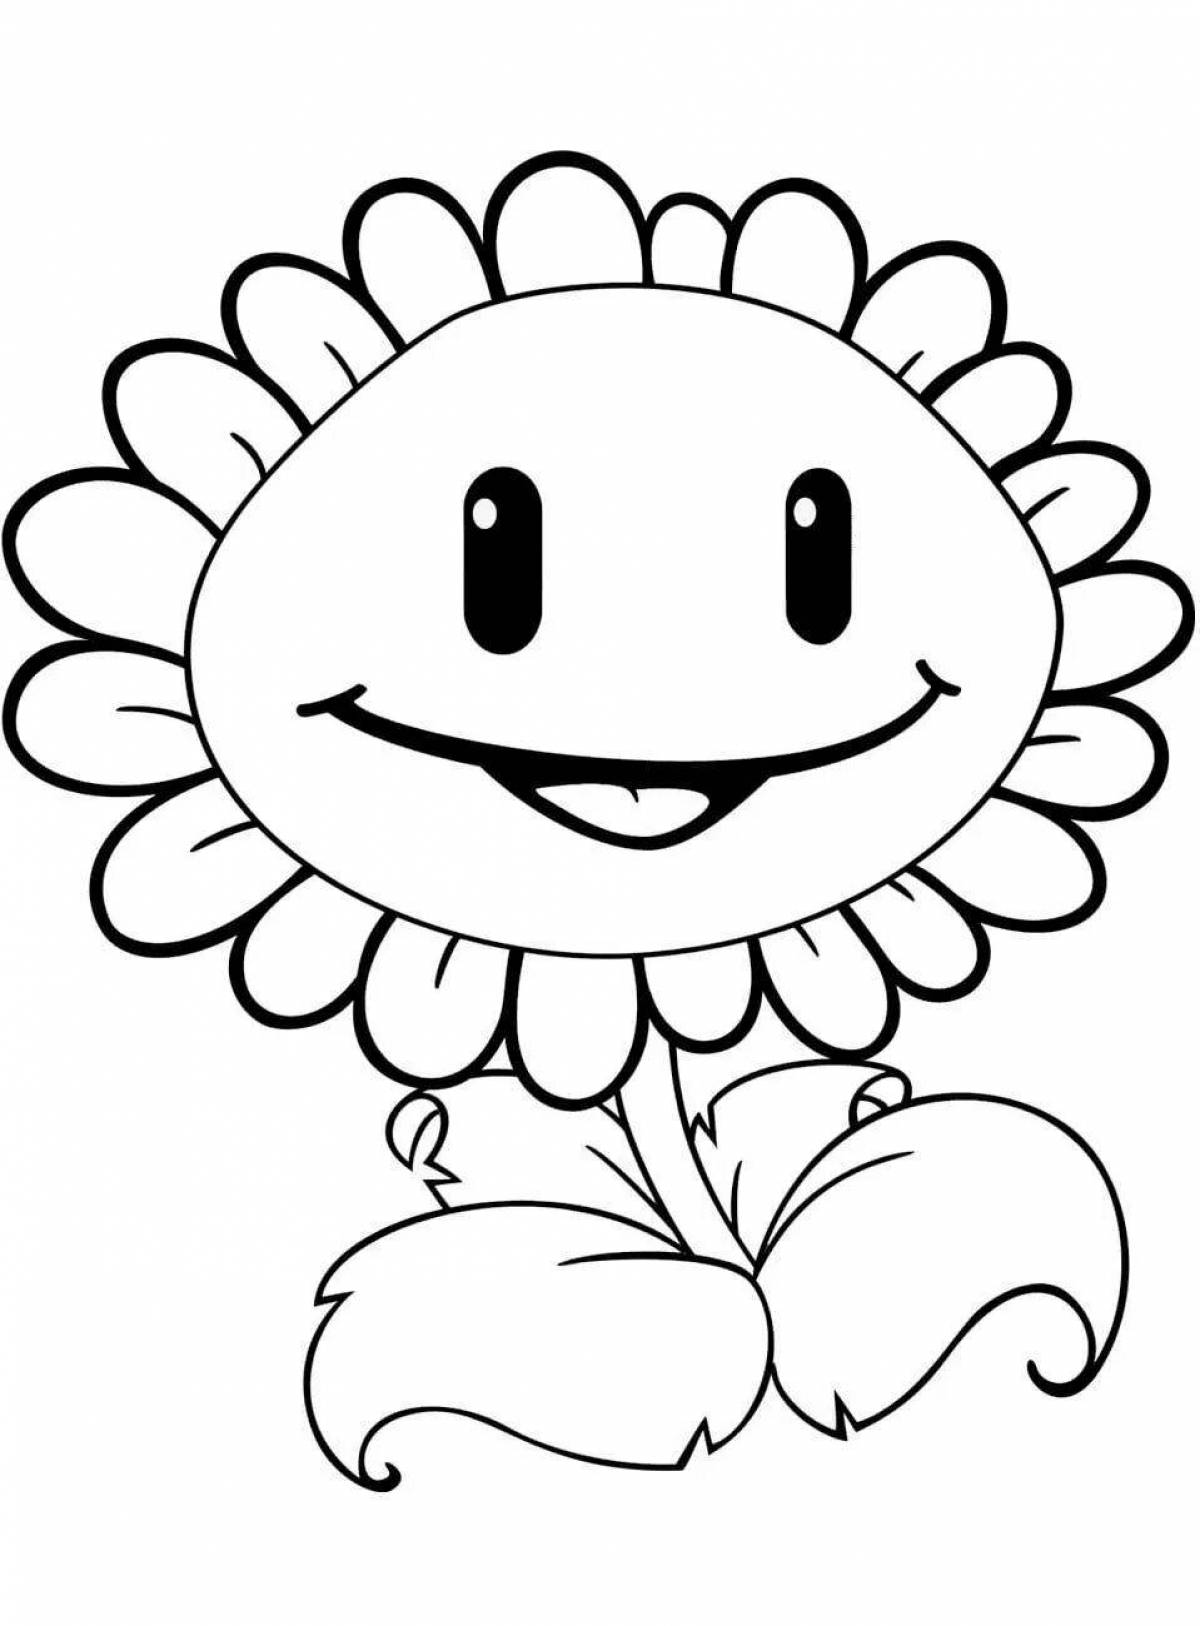 Attractive plants vs zombies 1 plant coloring page